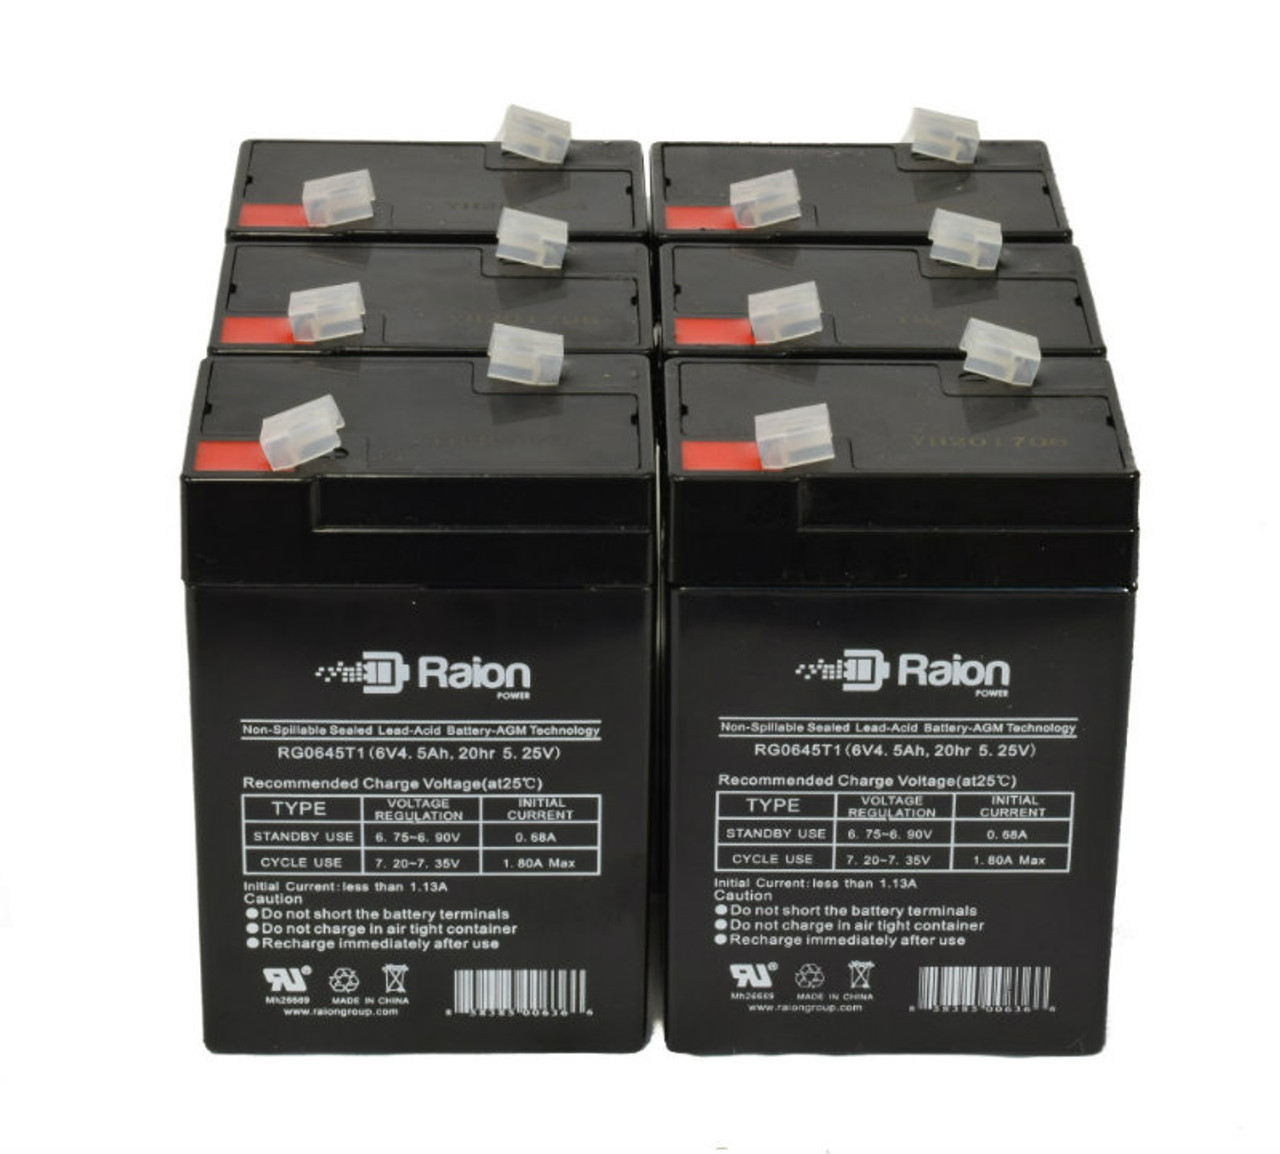 Raion Power 6 Volt 4.5Ah RG0645T1 Replacement Battery for MUST FC6-4CUT - 6 Pack